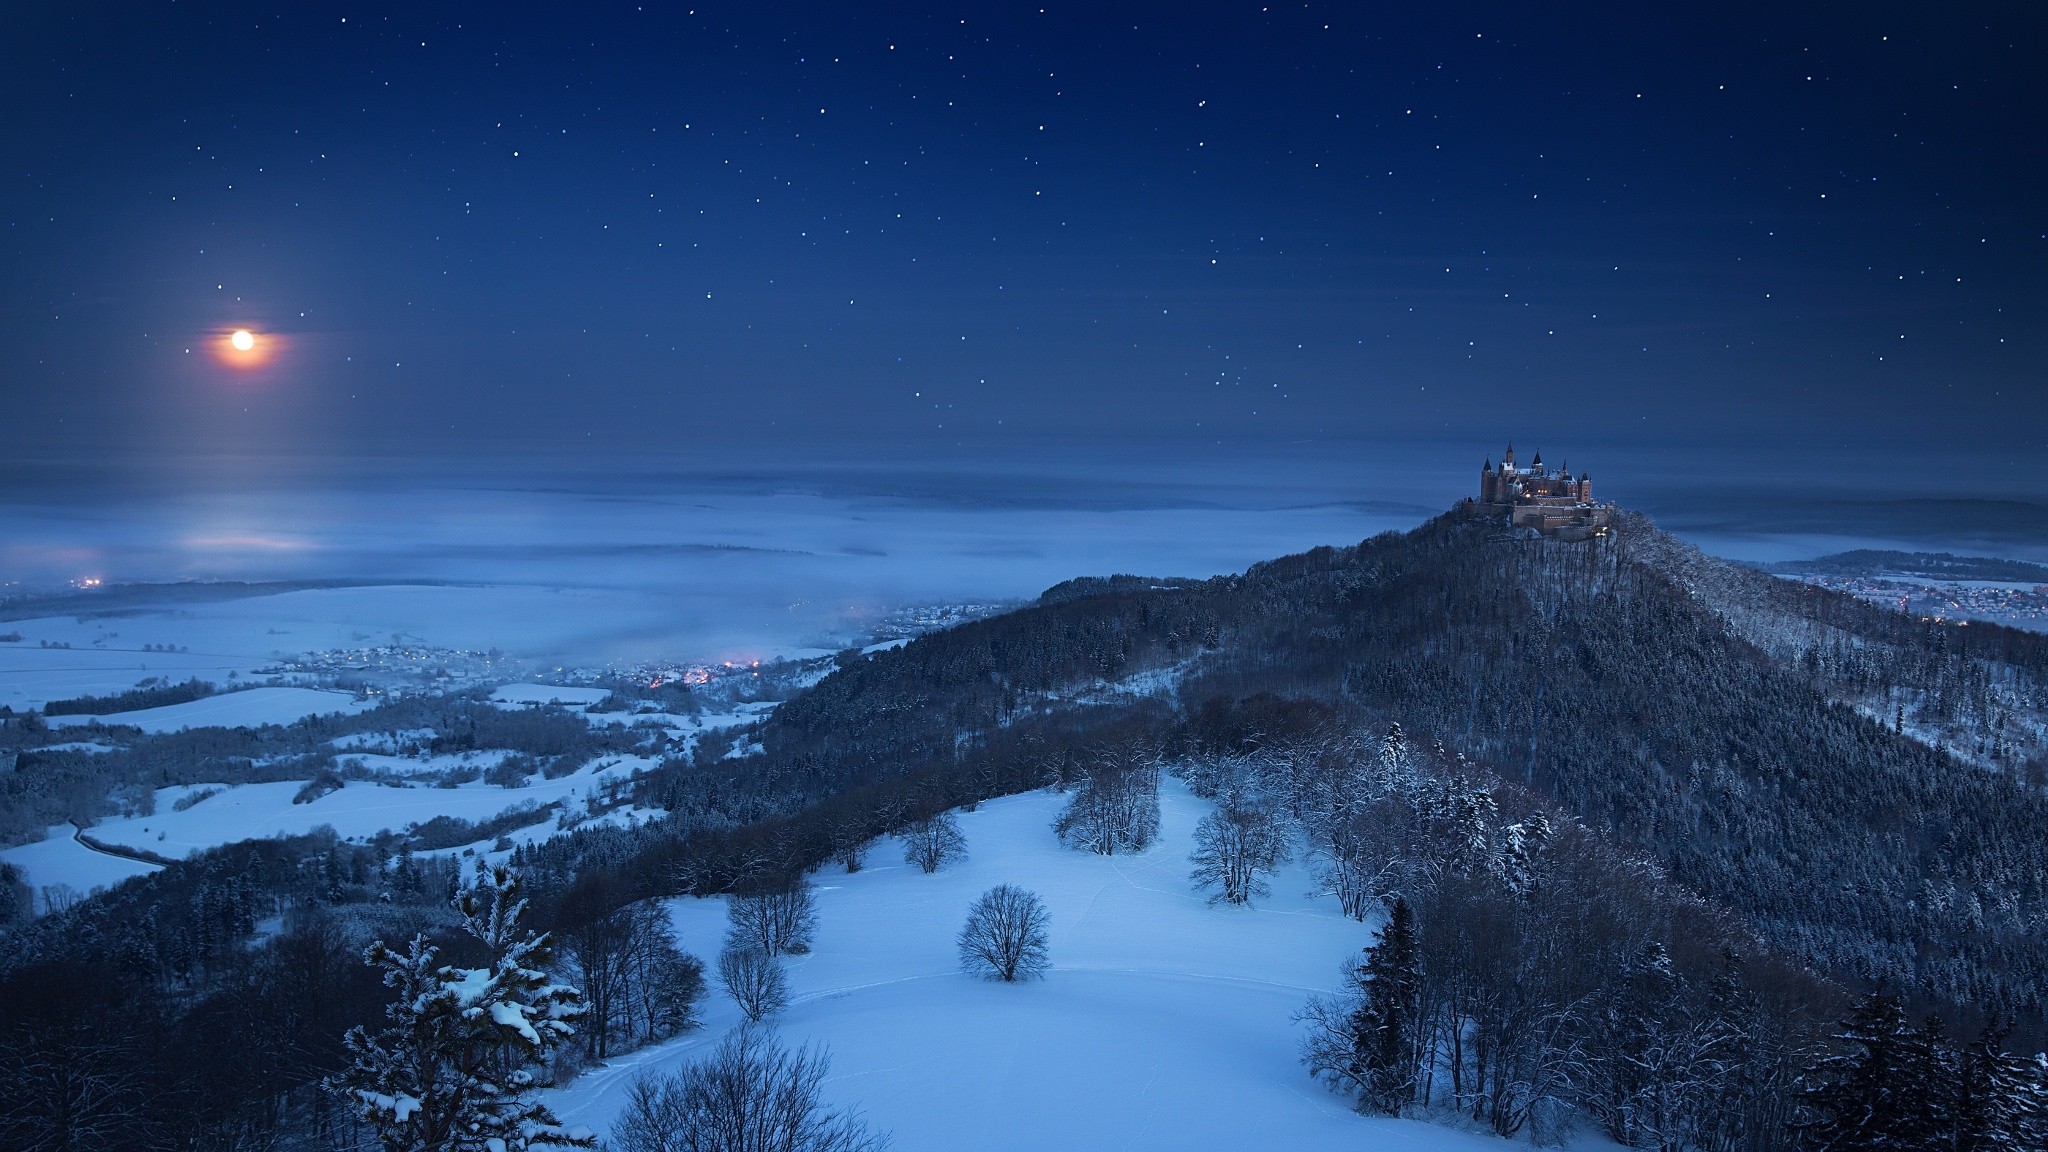 General 2048x1152 landscape nature winter castle snow forest Moon starry night moonlight valley Germany blue